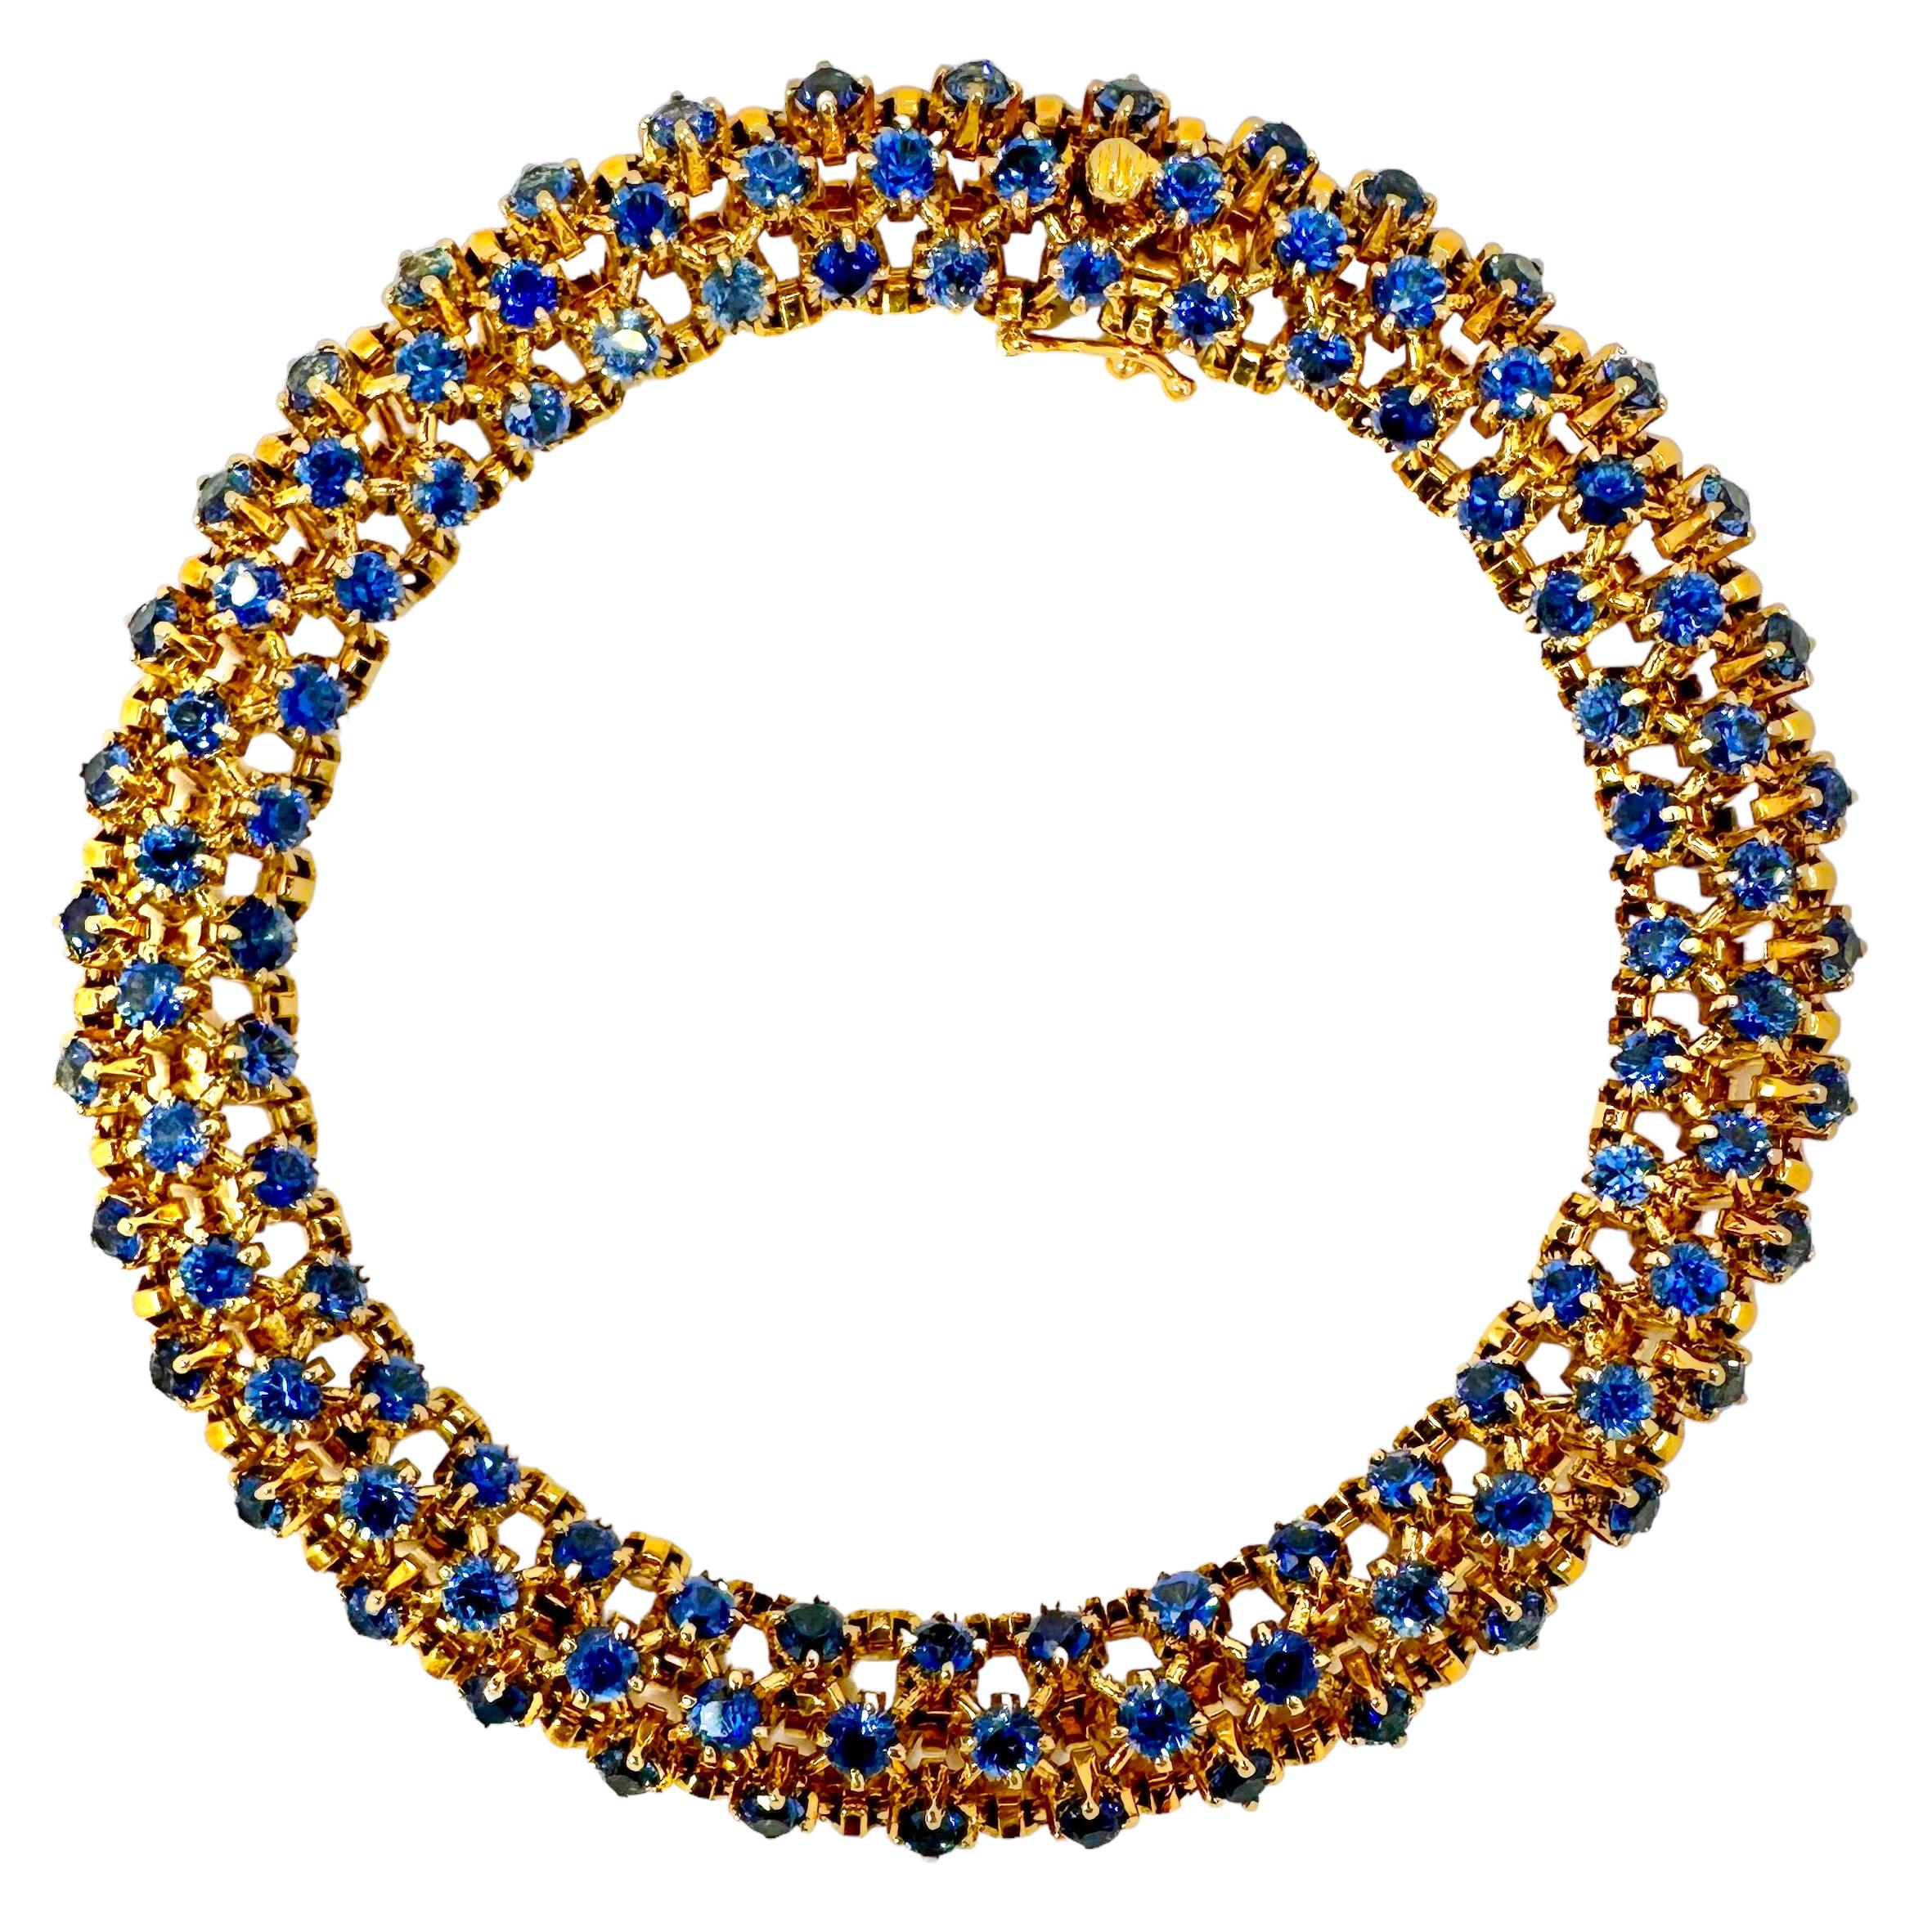 Exquisite Mid-20th Century French 18k Gold and Sapphire Bracelet For Sale